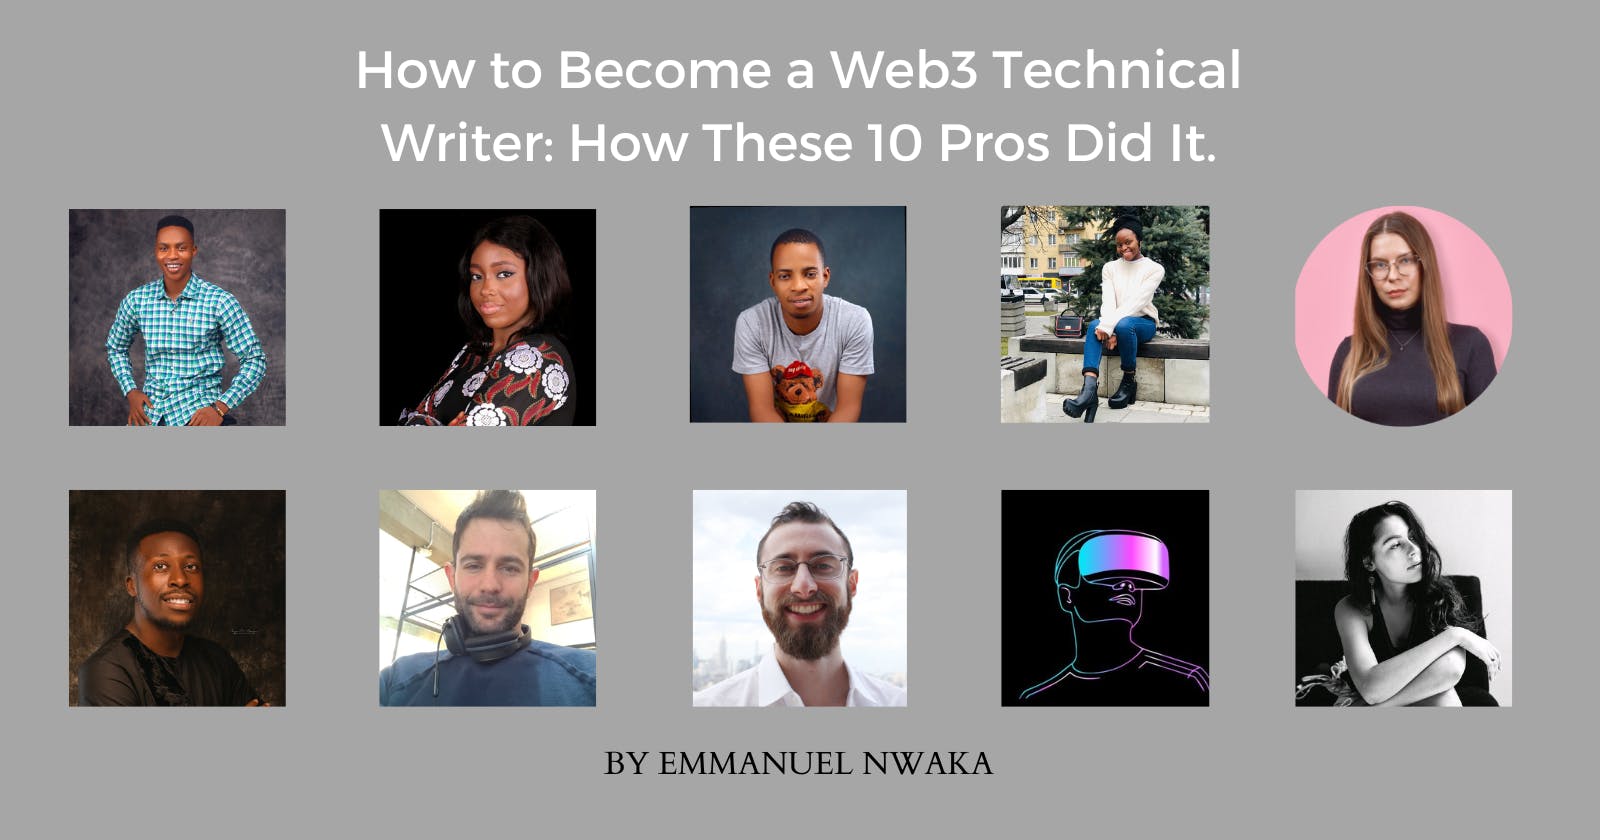 How to Become a Web3 Technical Writer: How These 10 Pros Did It.